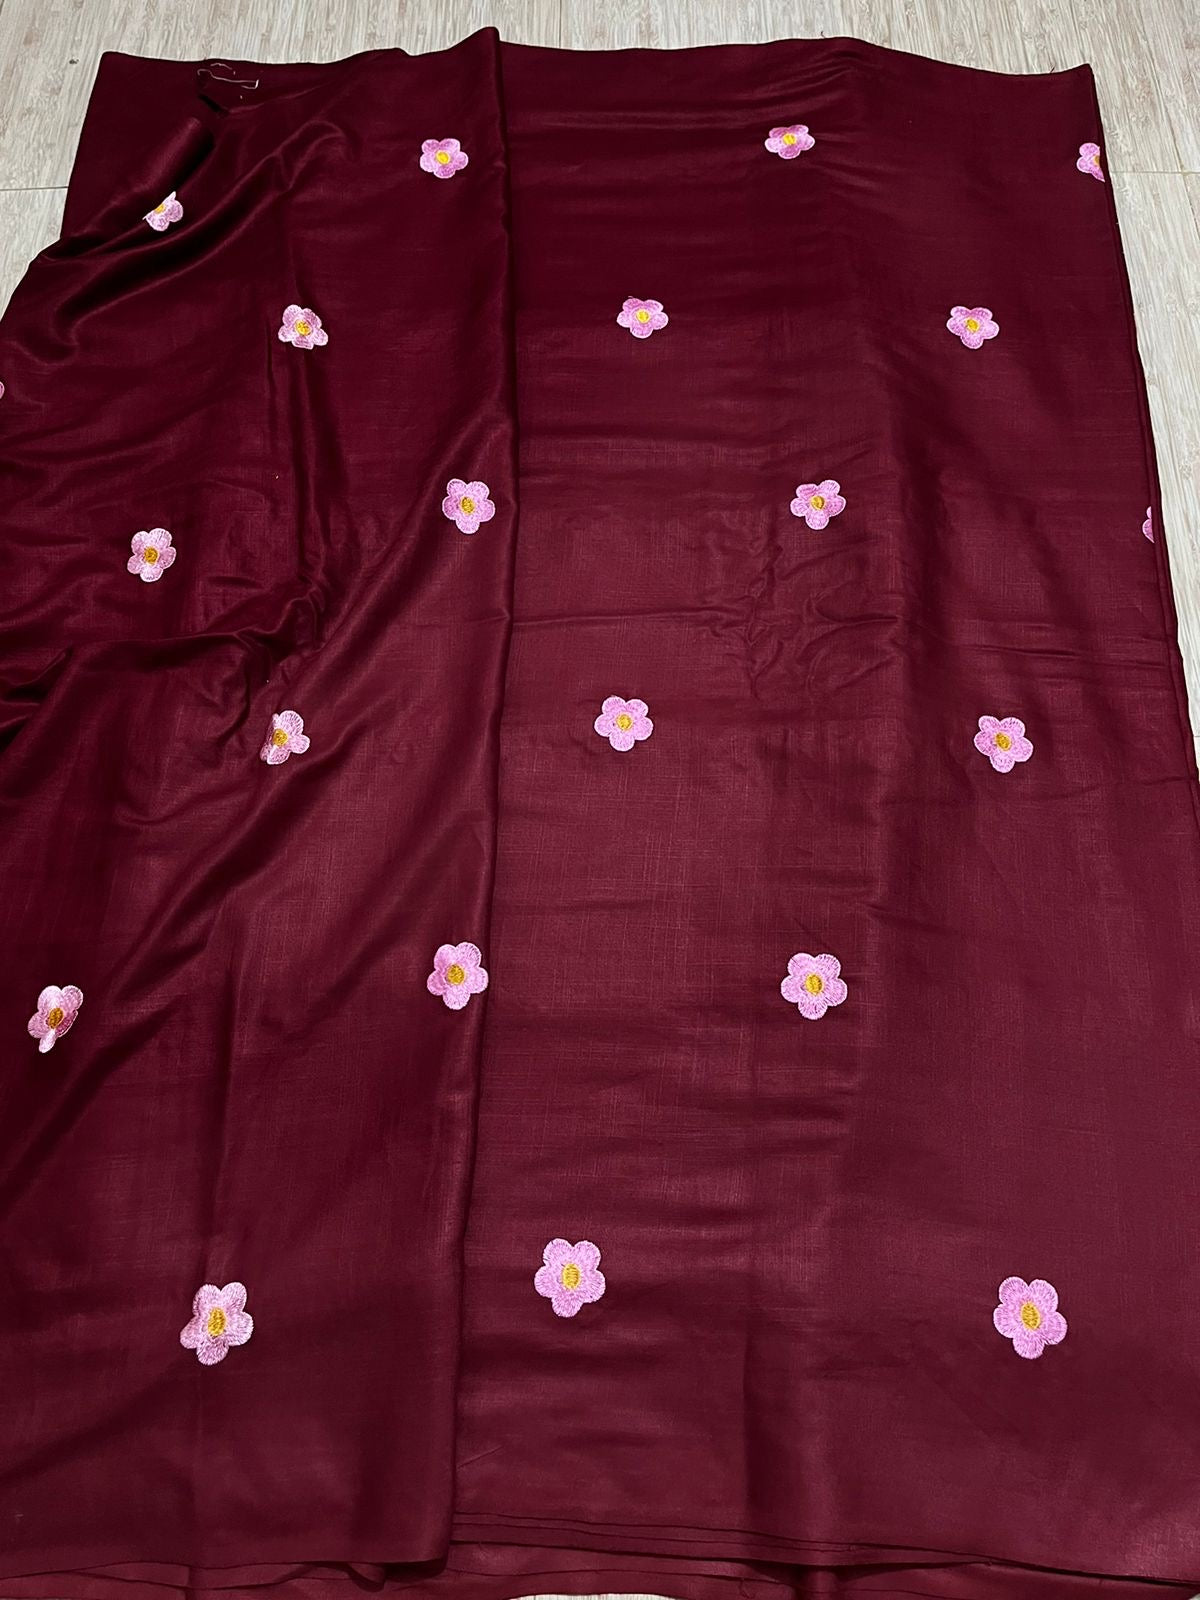 Handloom 100% Viscose Fabric with Embroidery motif - Dark Maroon with baby pink floral embroidery